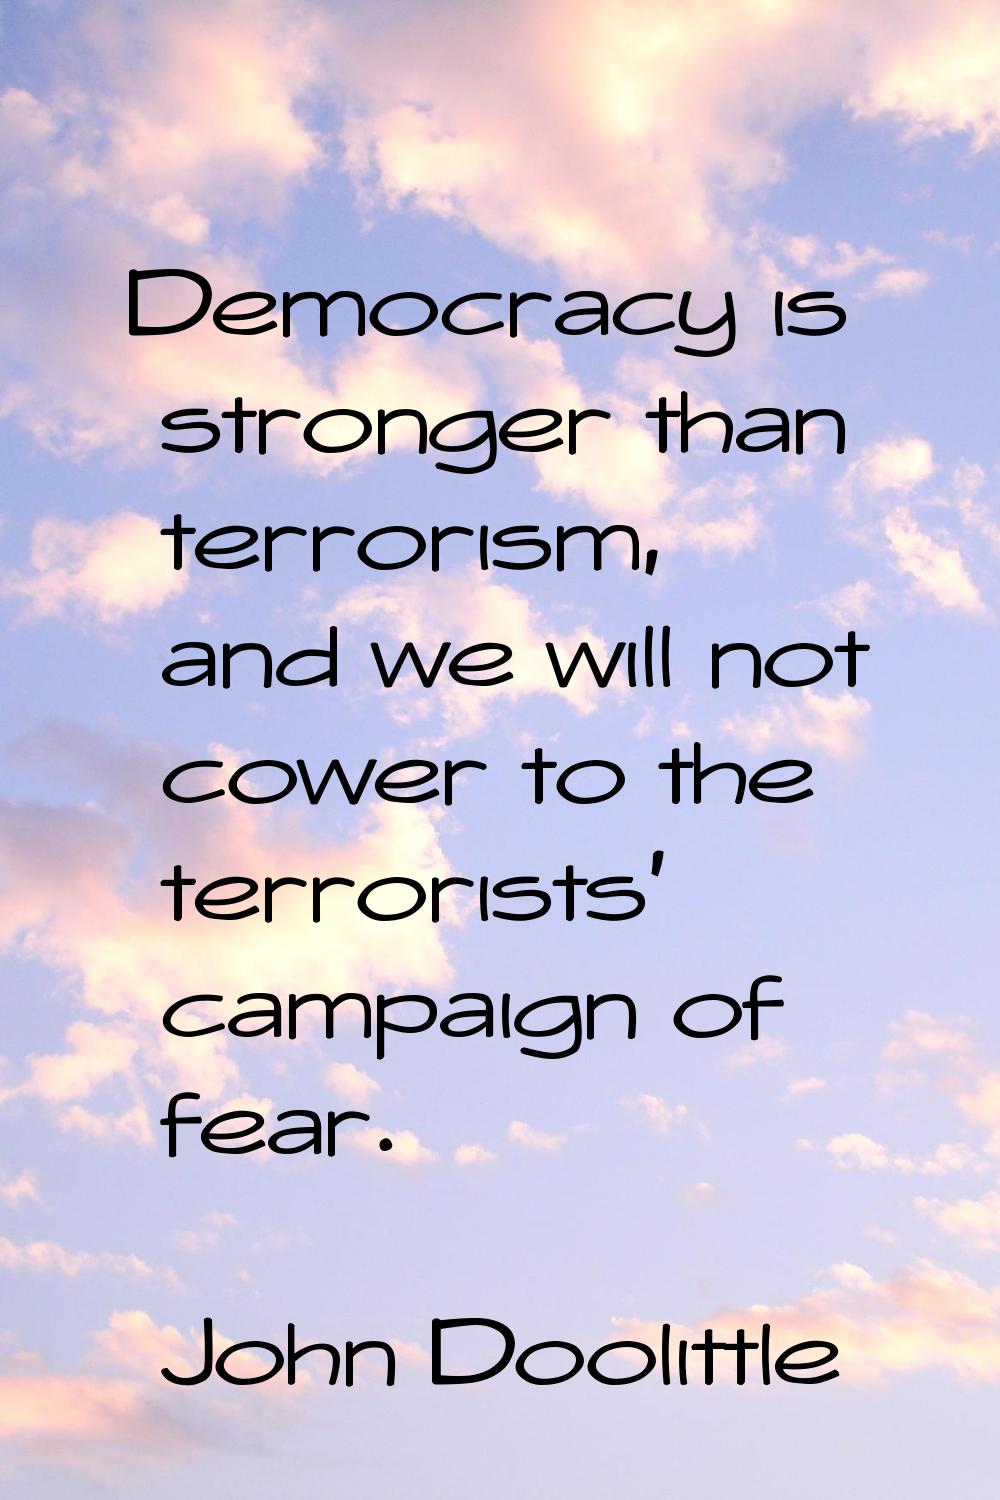 Democracy is stronger than terrorism, and we will not cower to the terrorists' campaign of fear.